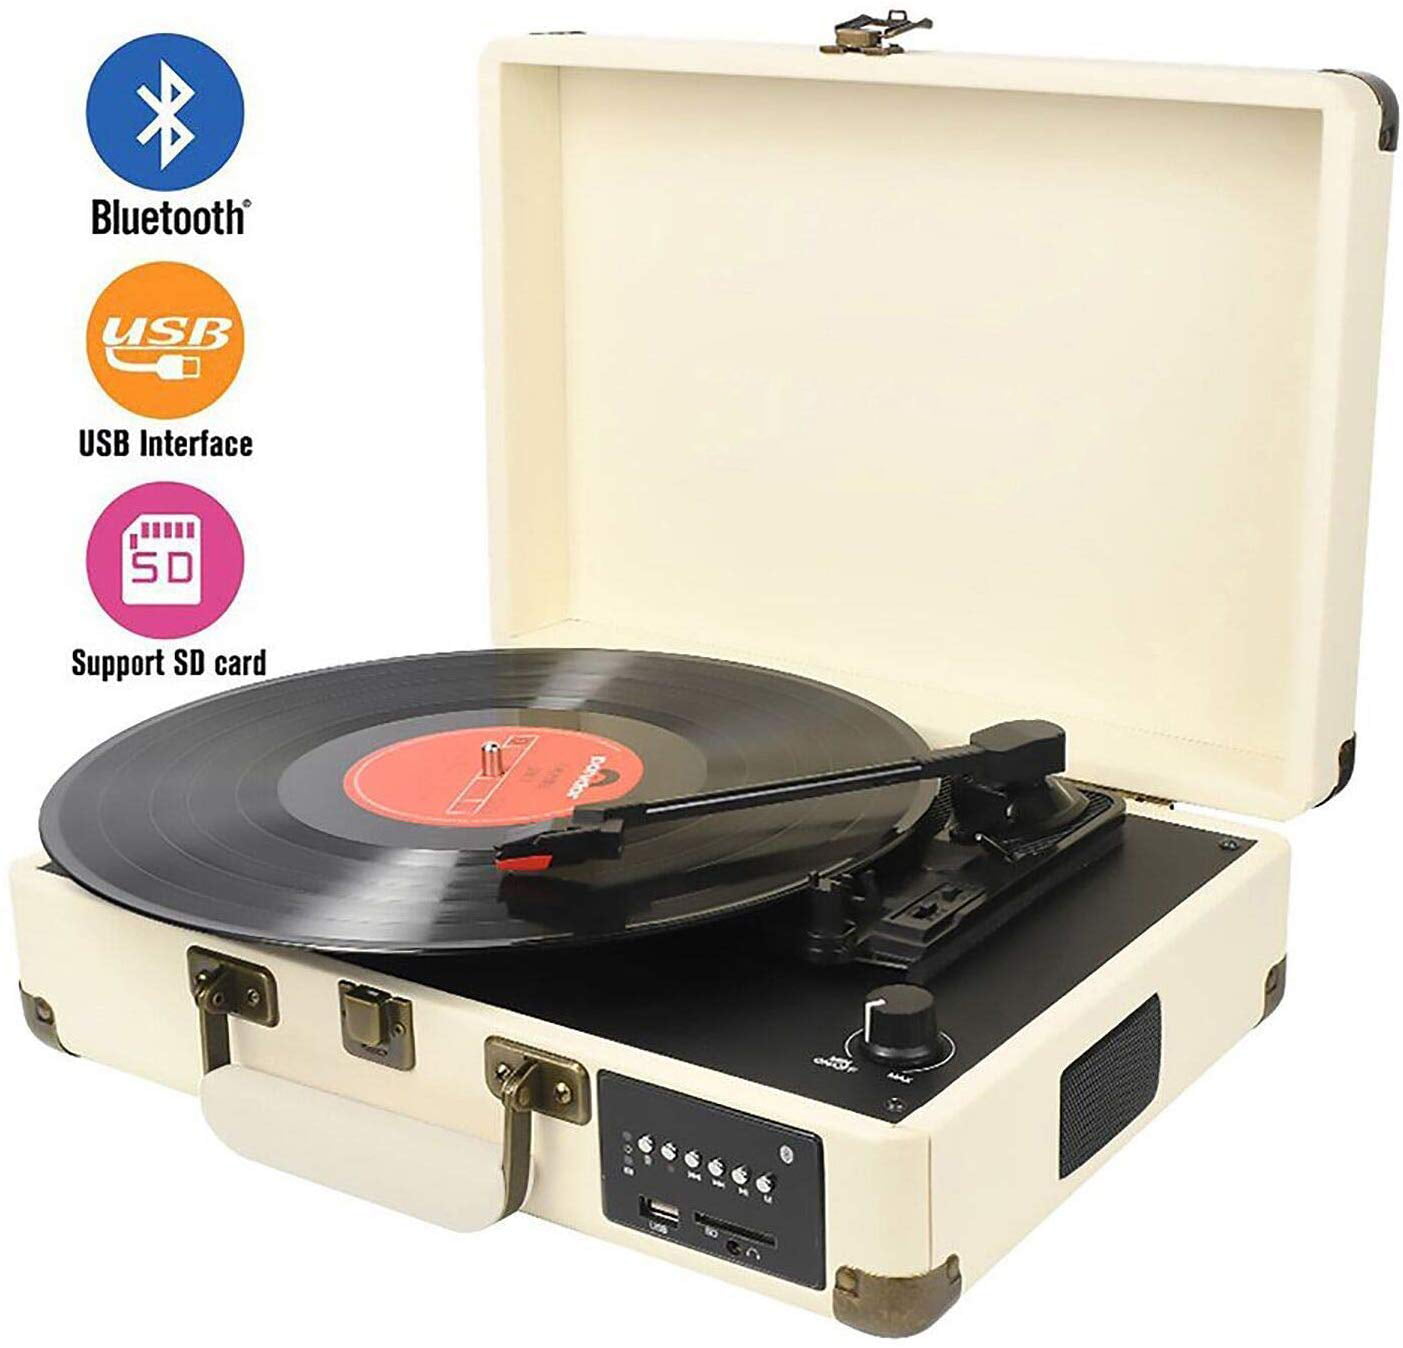 Record Player with Speakers Turntable for Vinyl Records Bluetooth in & Out USB Direct Vinyl to MP3 Recording Belt Drive Professional LP Phonograph Automatic Vintage Solid Record Player Black